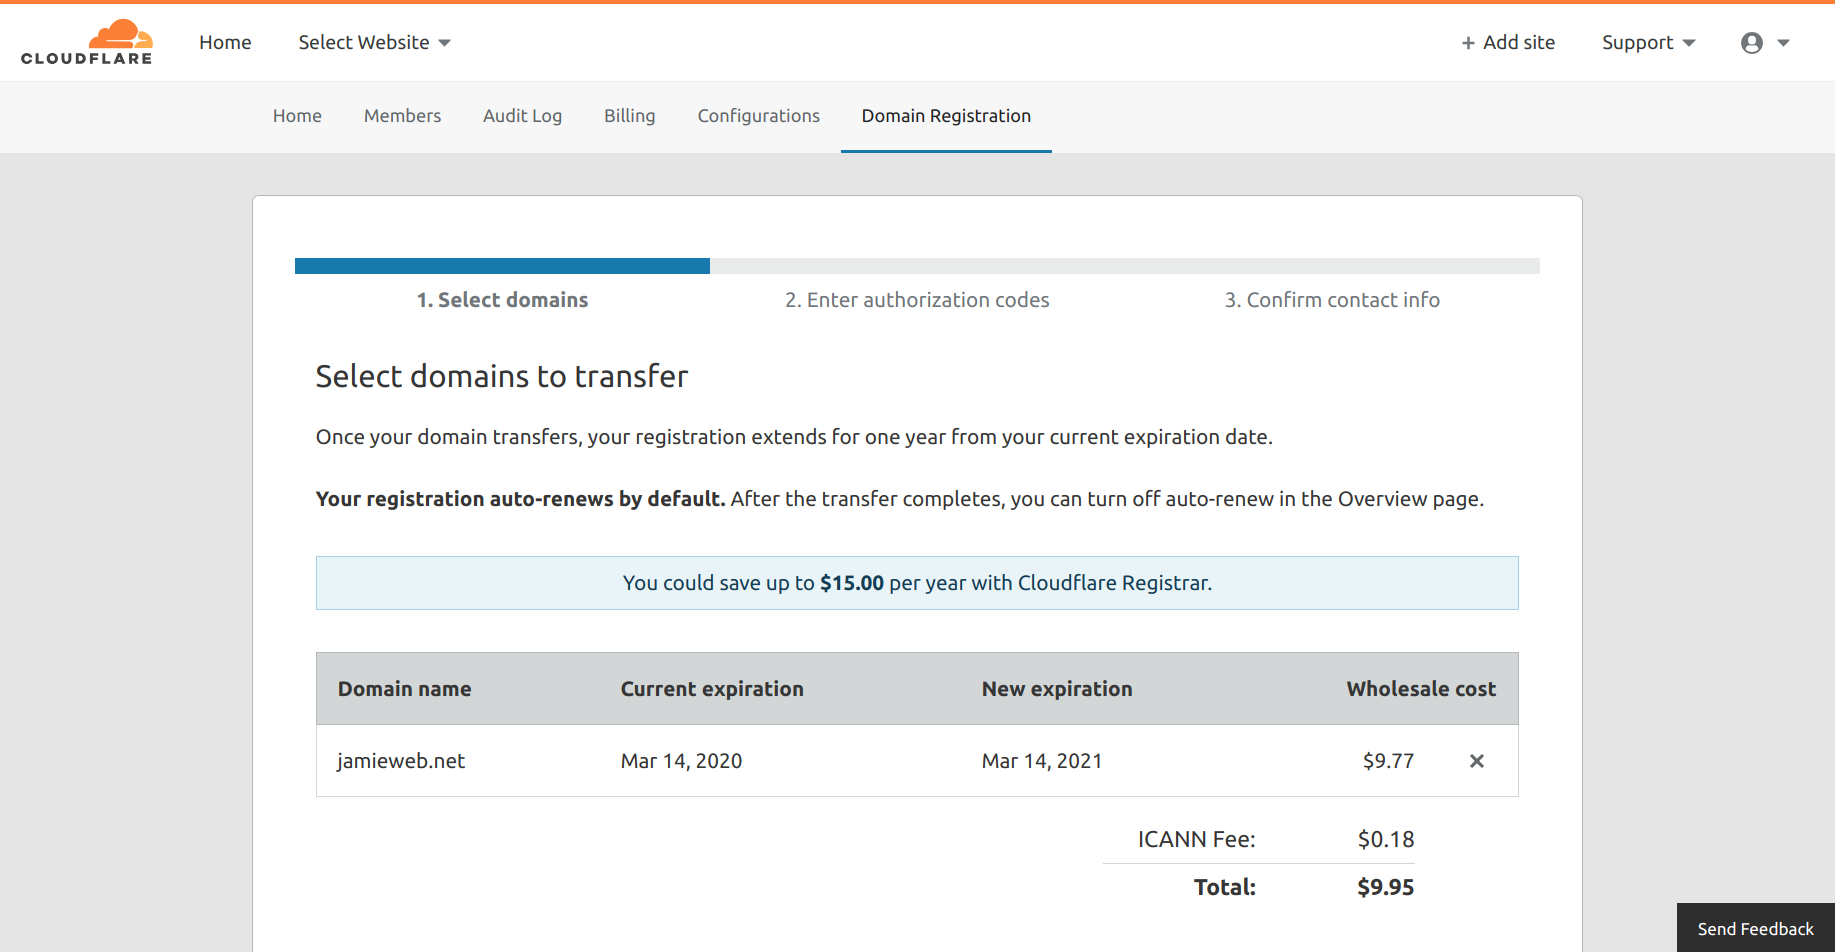 A screenshot of the domain name selection screen for choosing which domain names to transfer to Cloudflare.